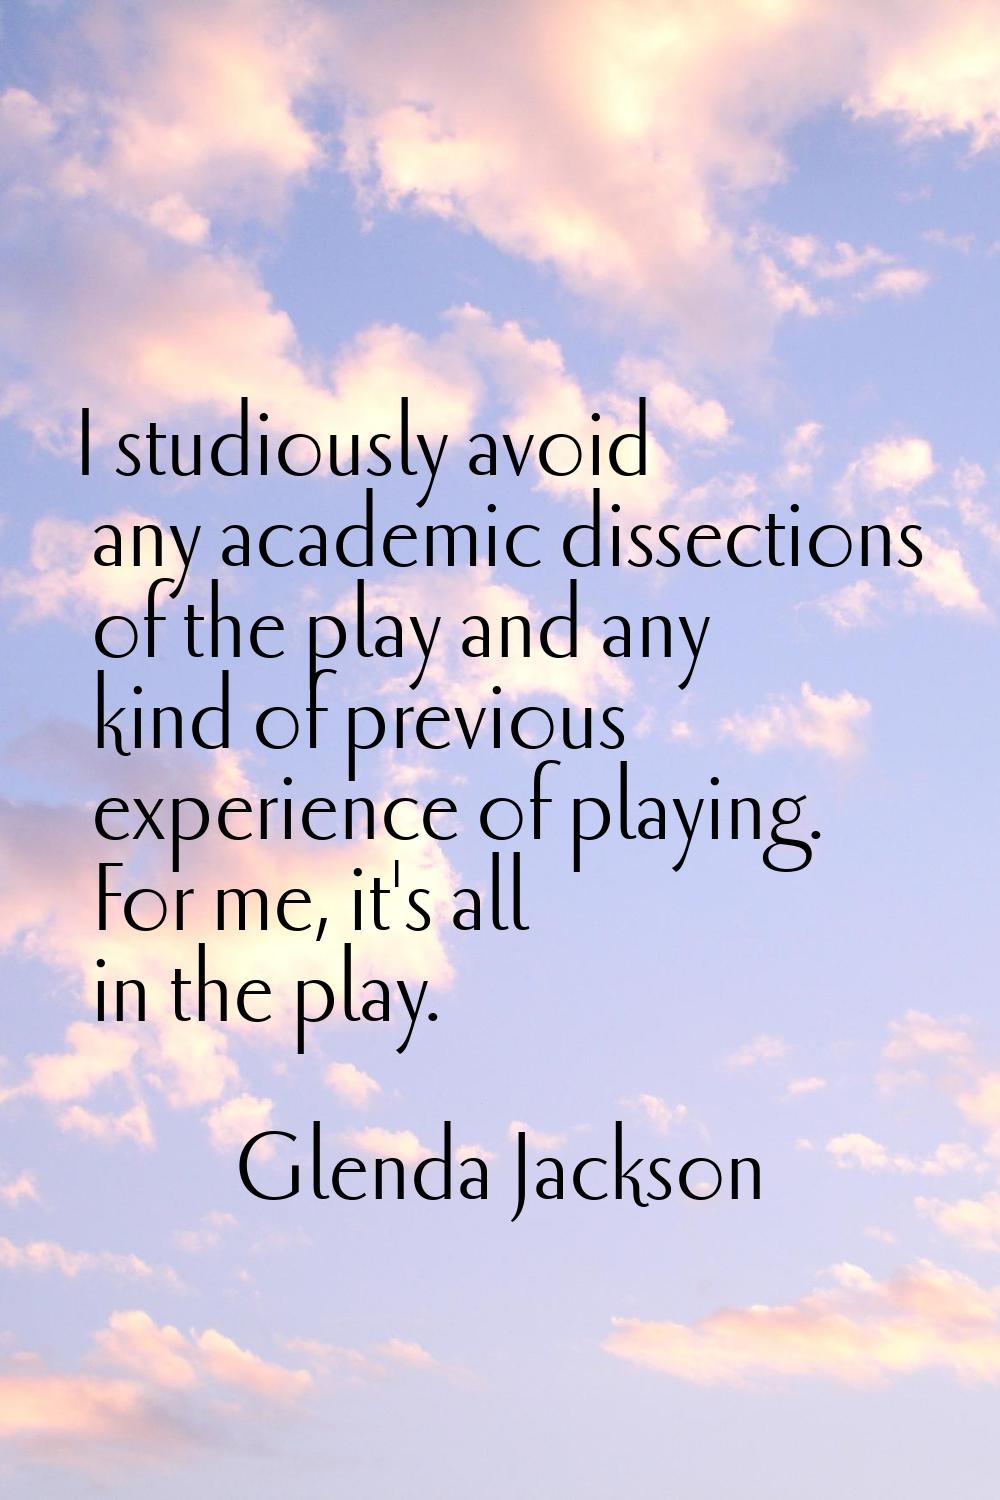 I studiously avoid any academic dissections of the play and any kind of previous experience of play